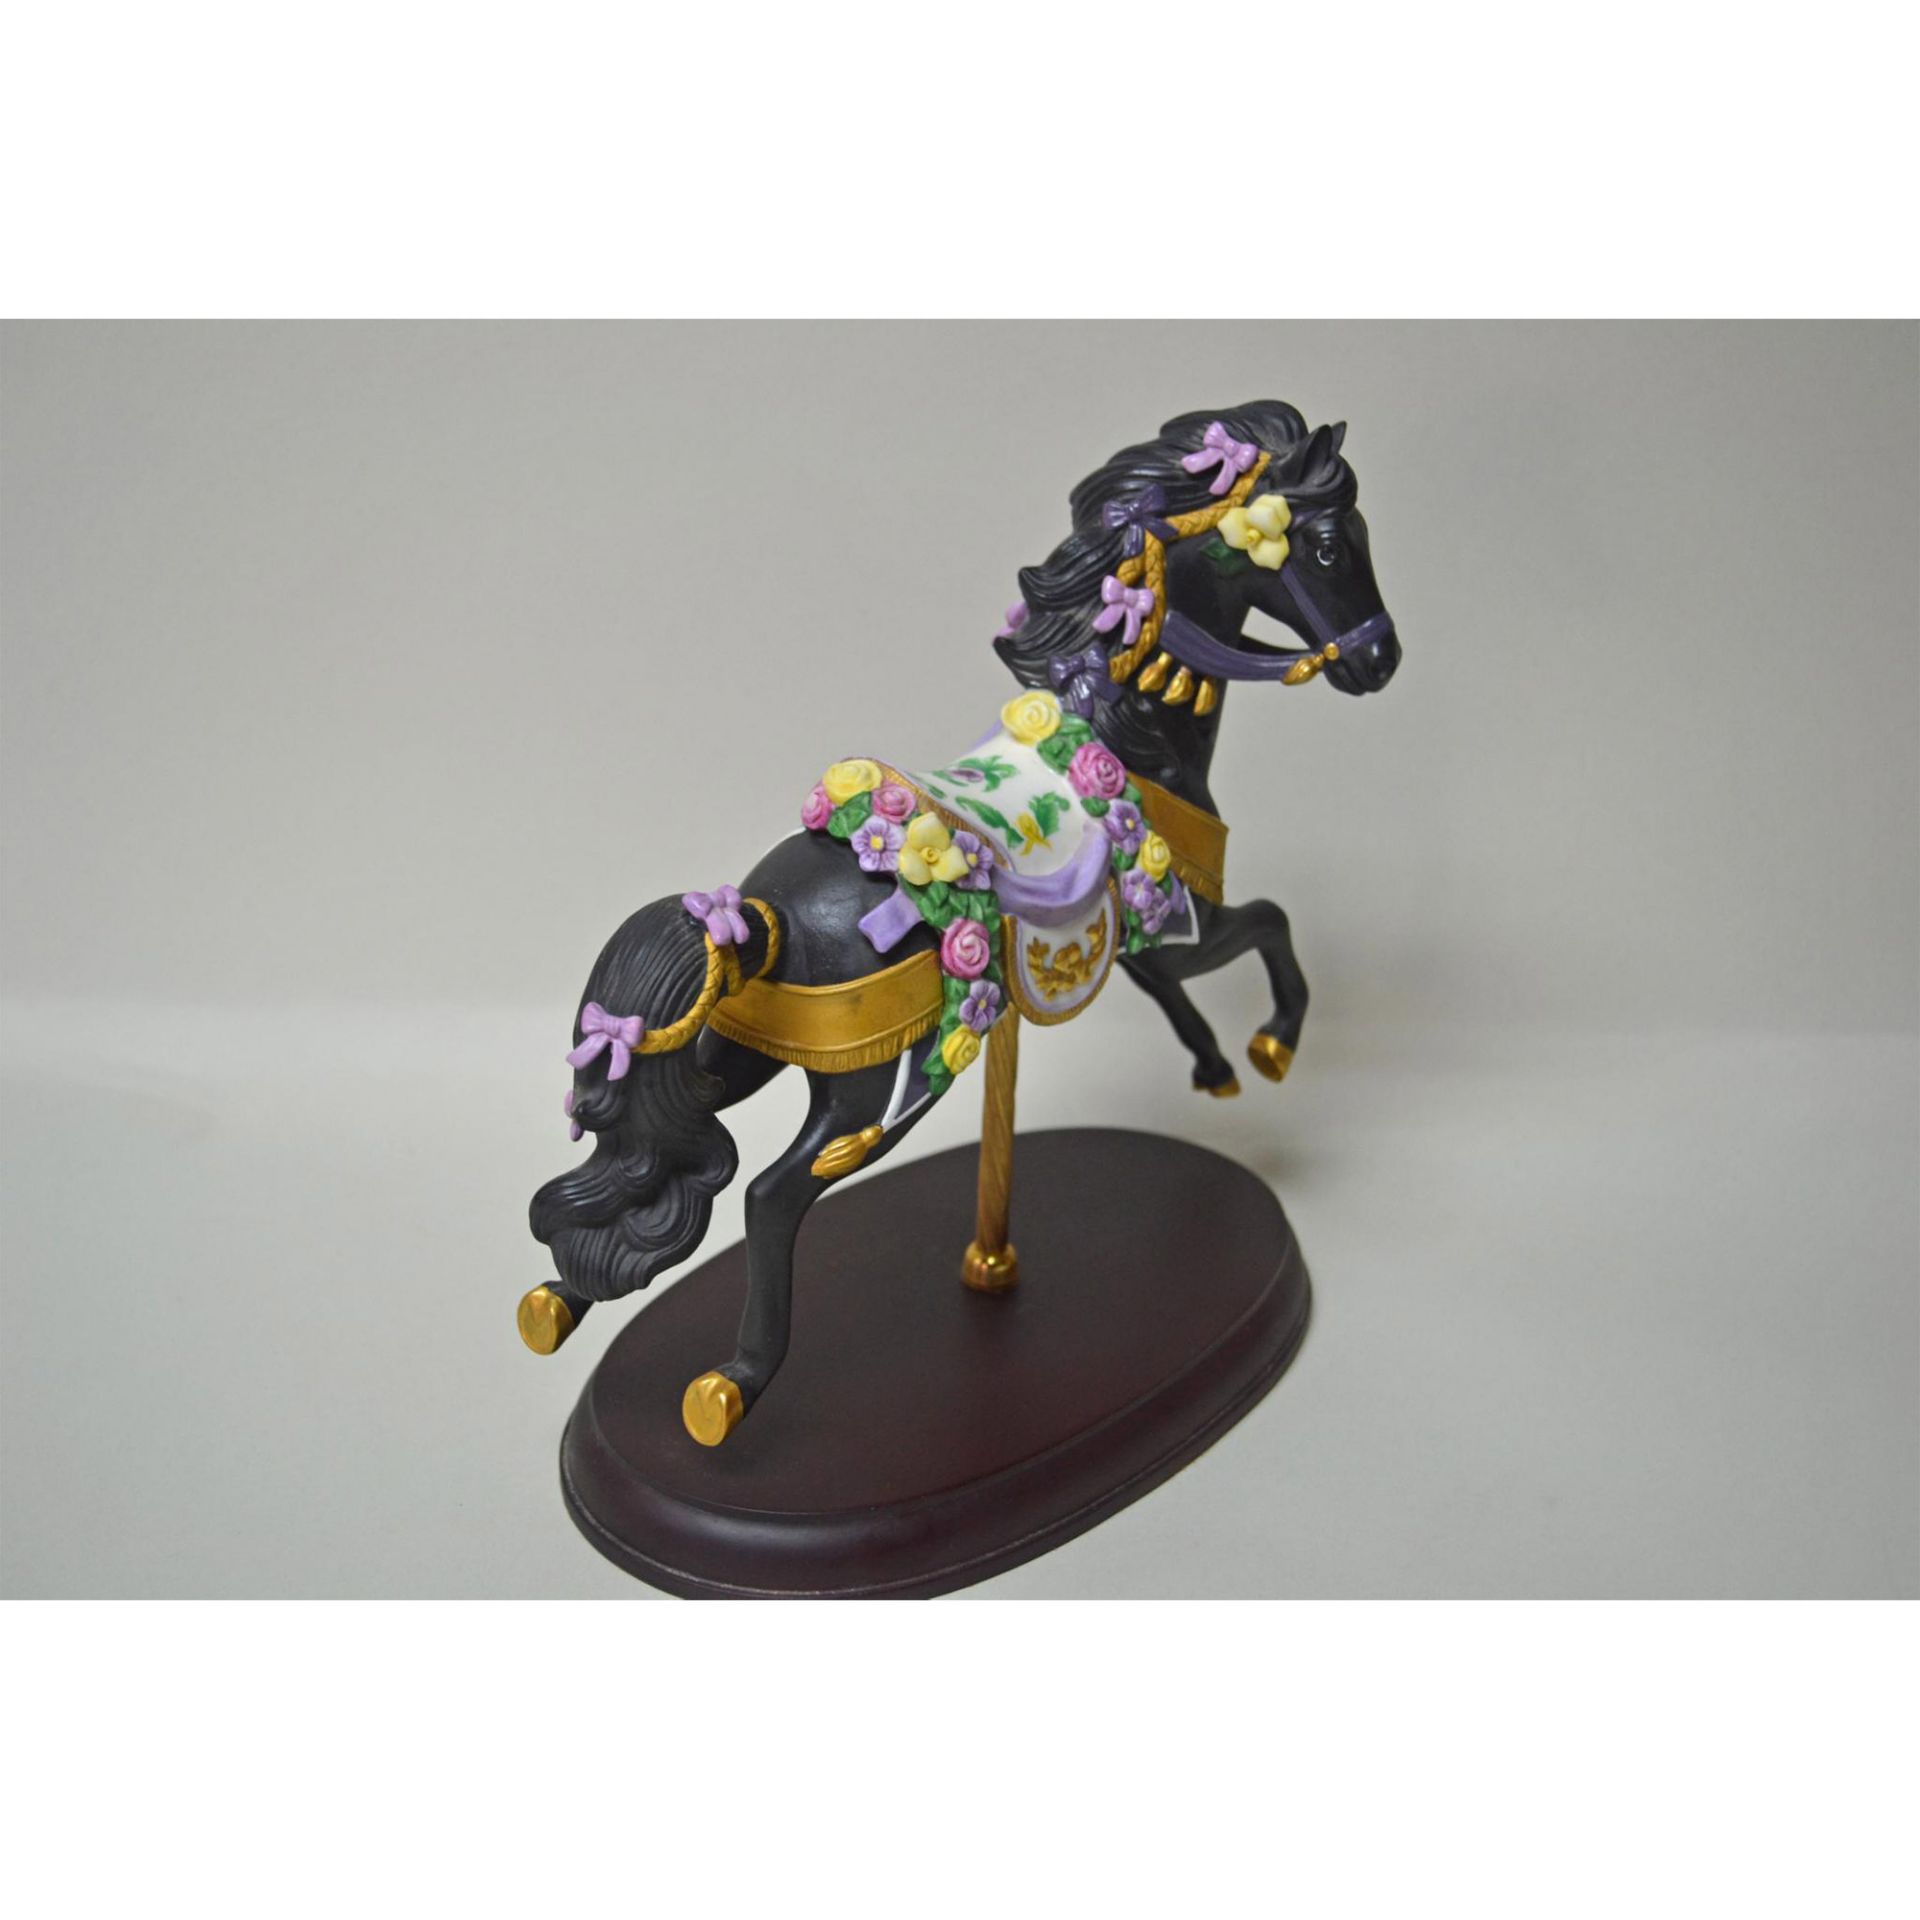 Lenox Vintage Carousel 1993 Midnight Charger Horse Figurine - Image 3 of 4